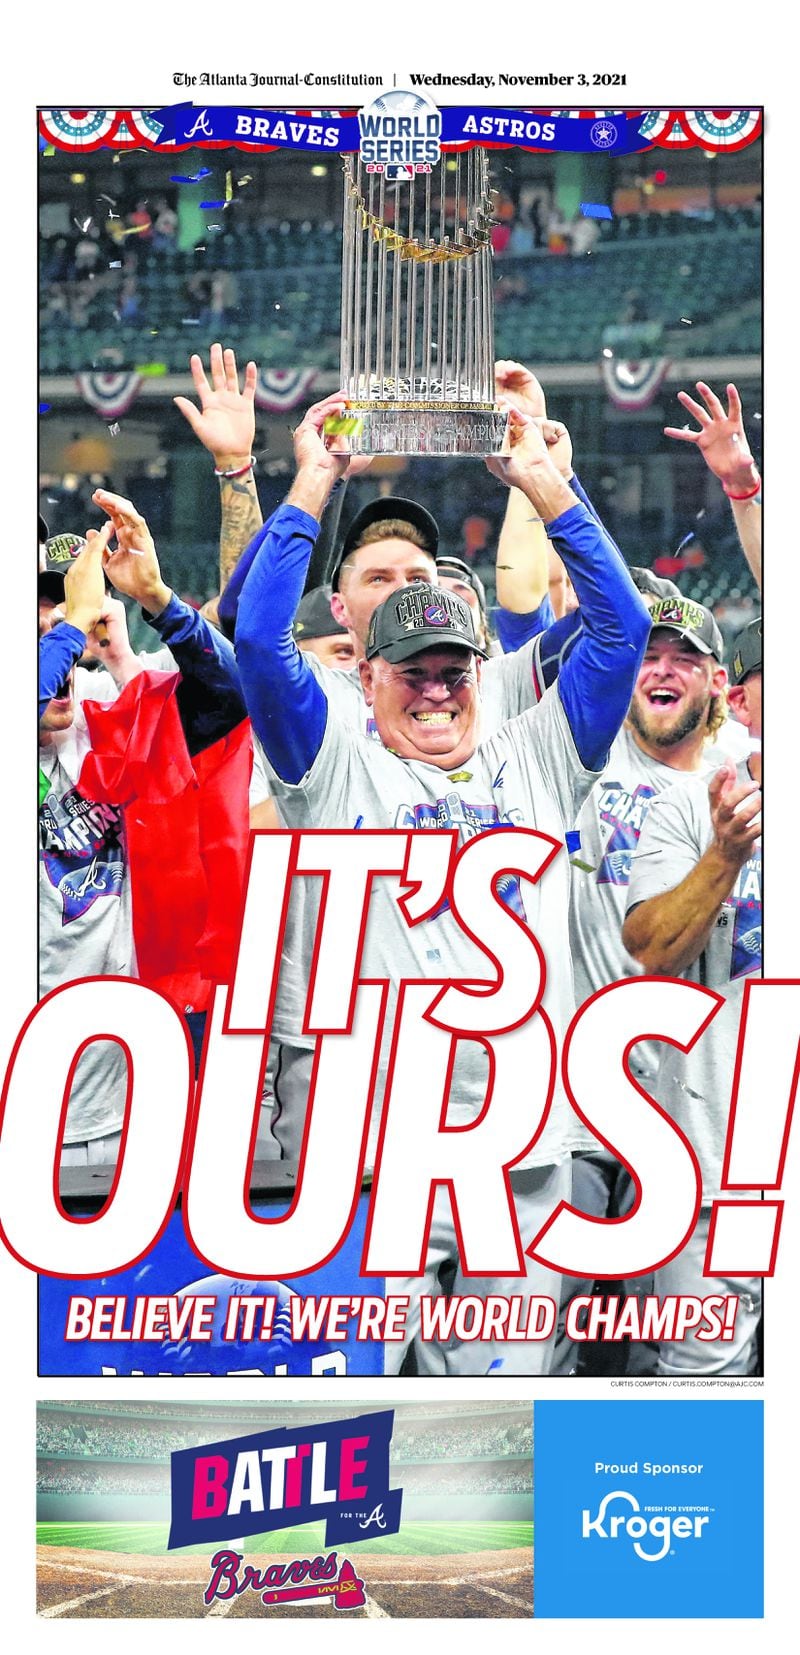 ‘It’s Ours!’ – Atlanta Braves World Series section in today’s ePaper